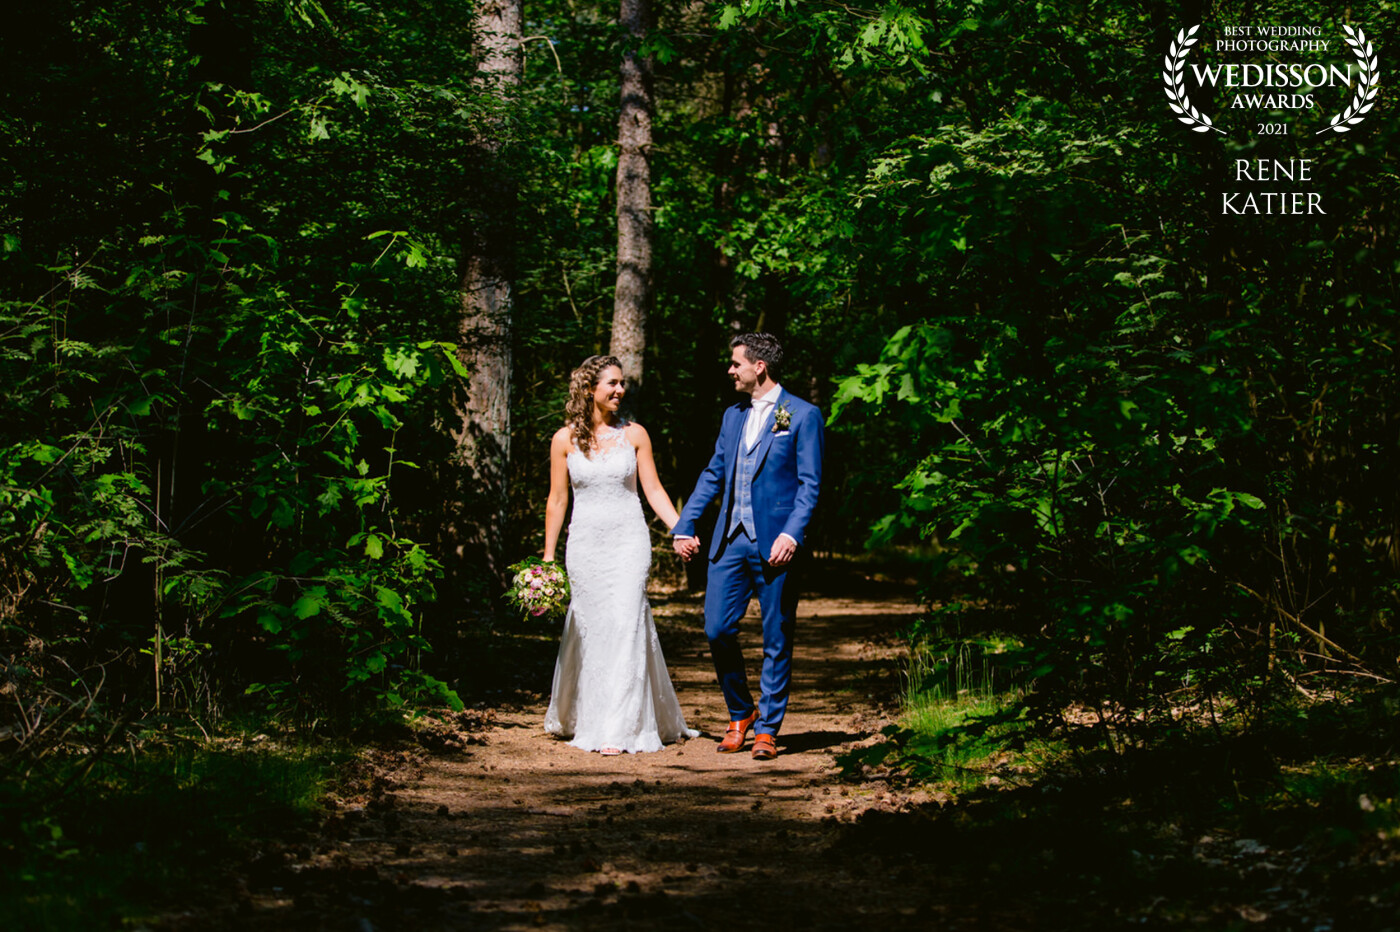 Taking a Walk in a forest, made us find this lovely Sunny spot. The couple loved this walk together. It's always fun to have a relaxing moment when having An photoshoot. 